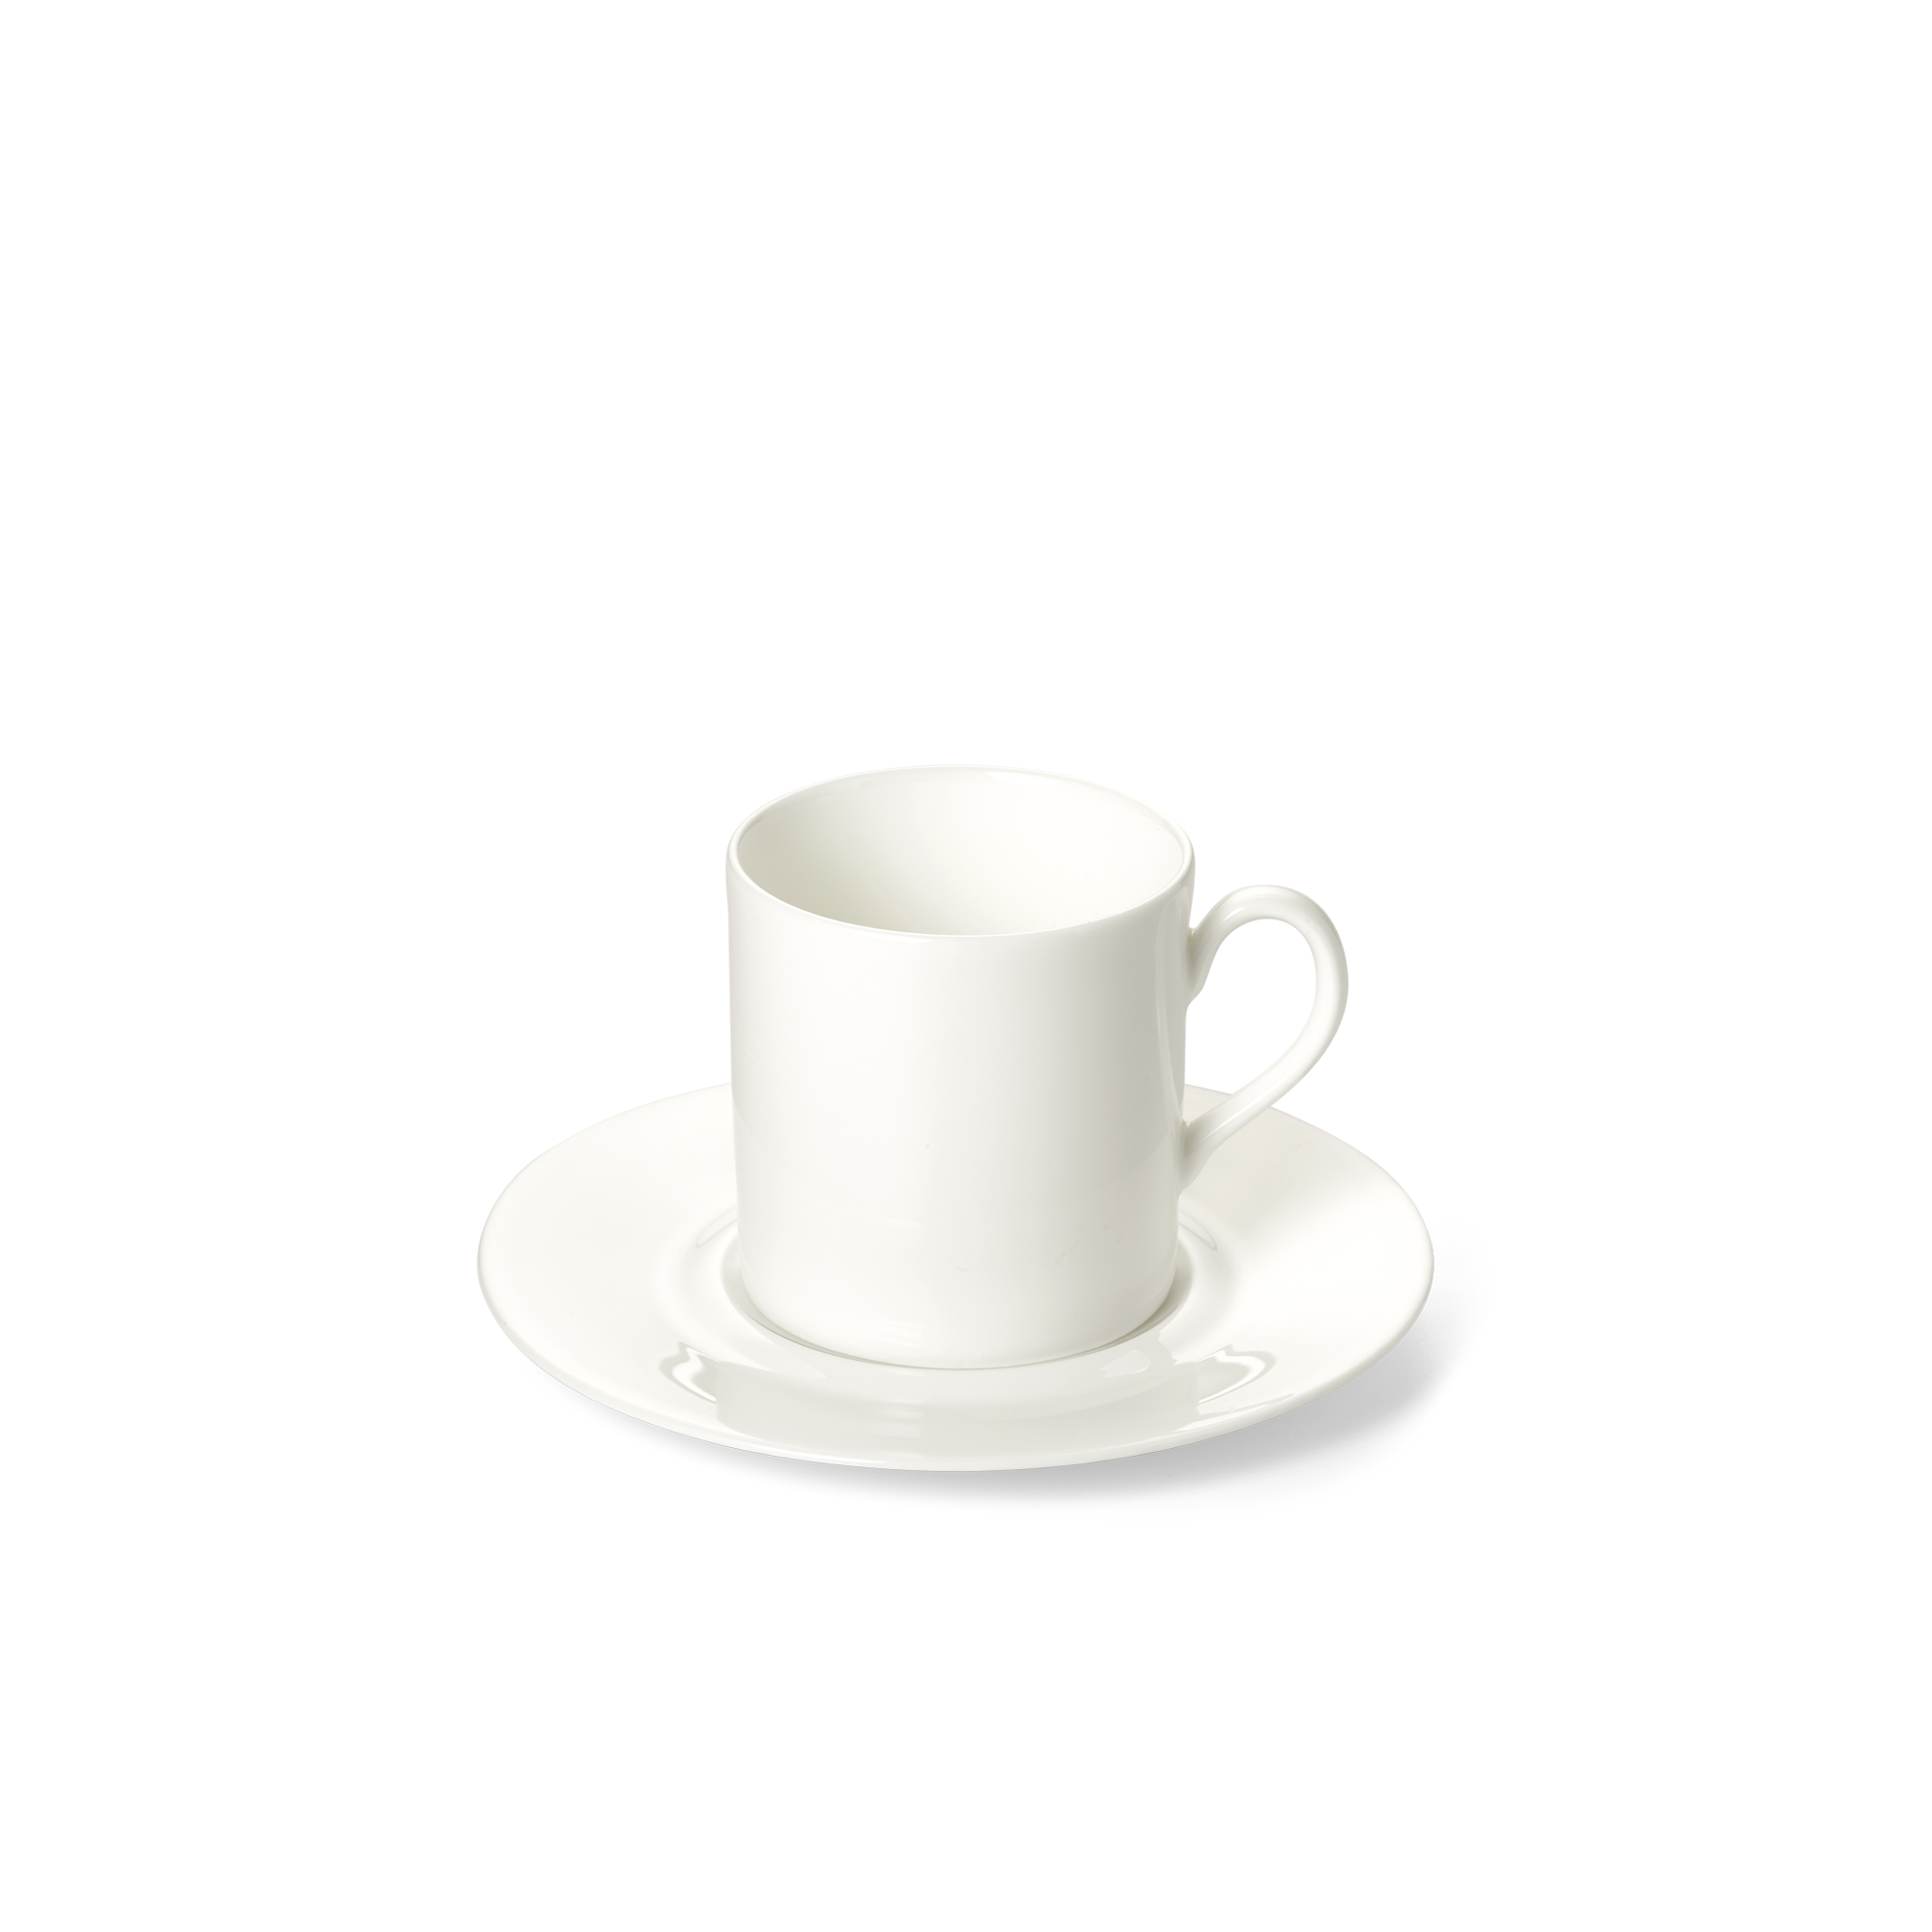 Espresso cup cyl. white, saucer flat